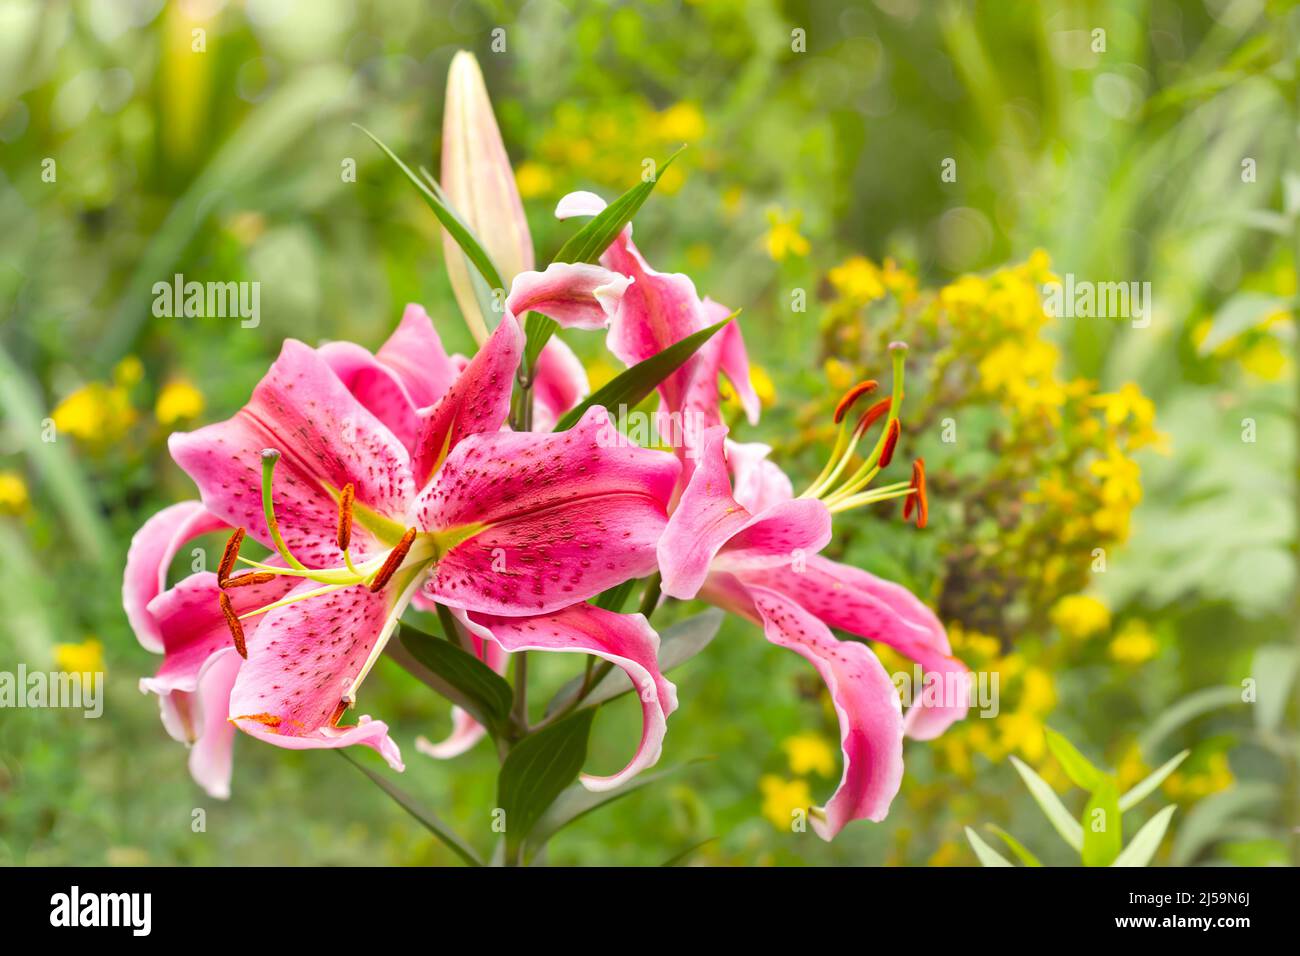 Large pink lilies with speckled petals on a defocused garden background. Selective focus Stock Photo